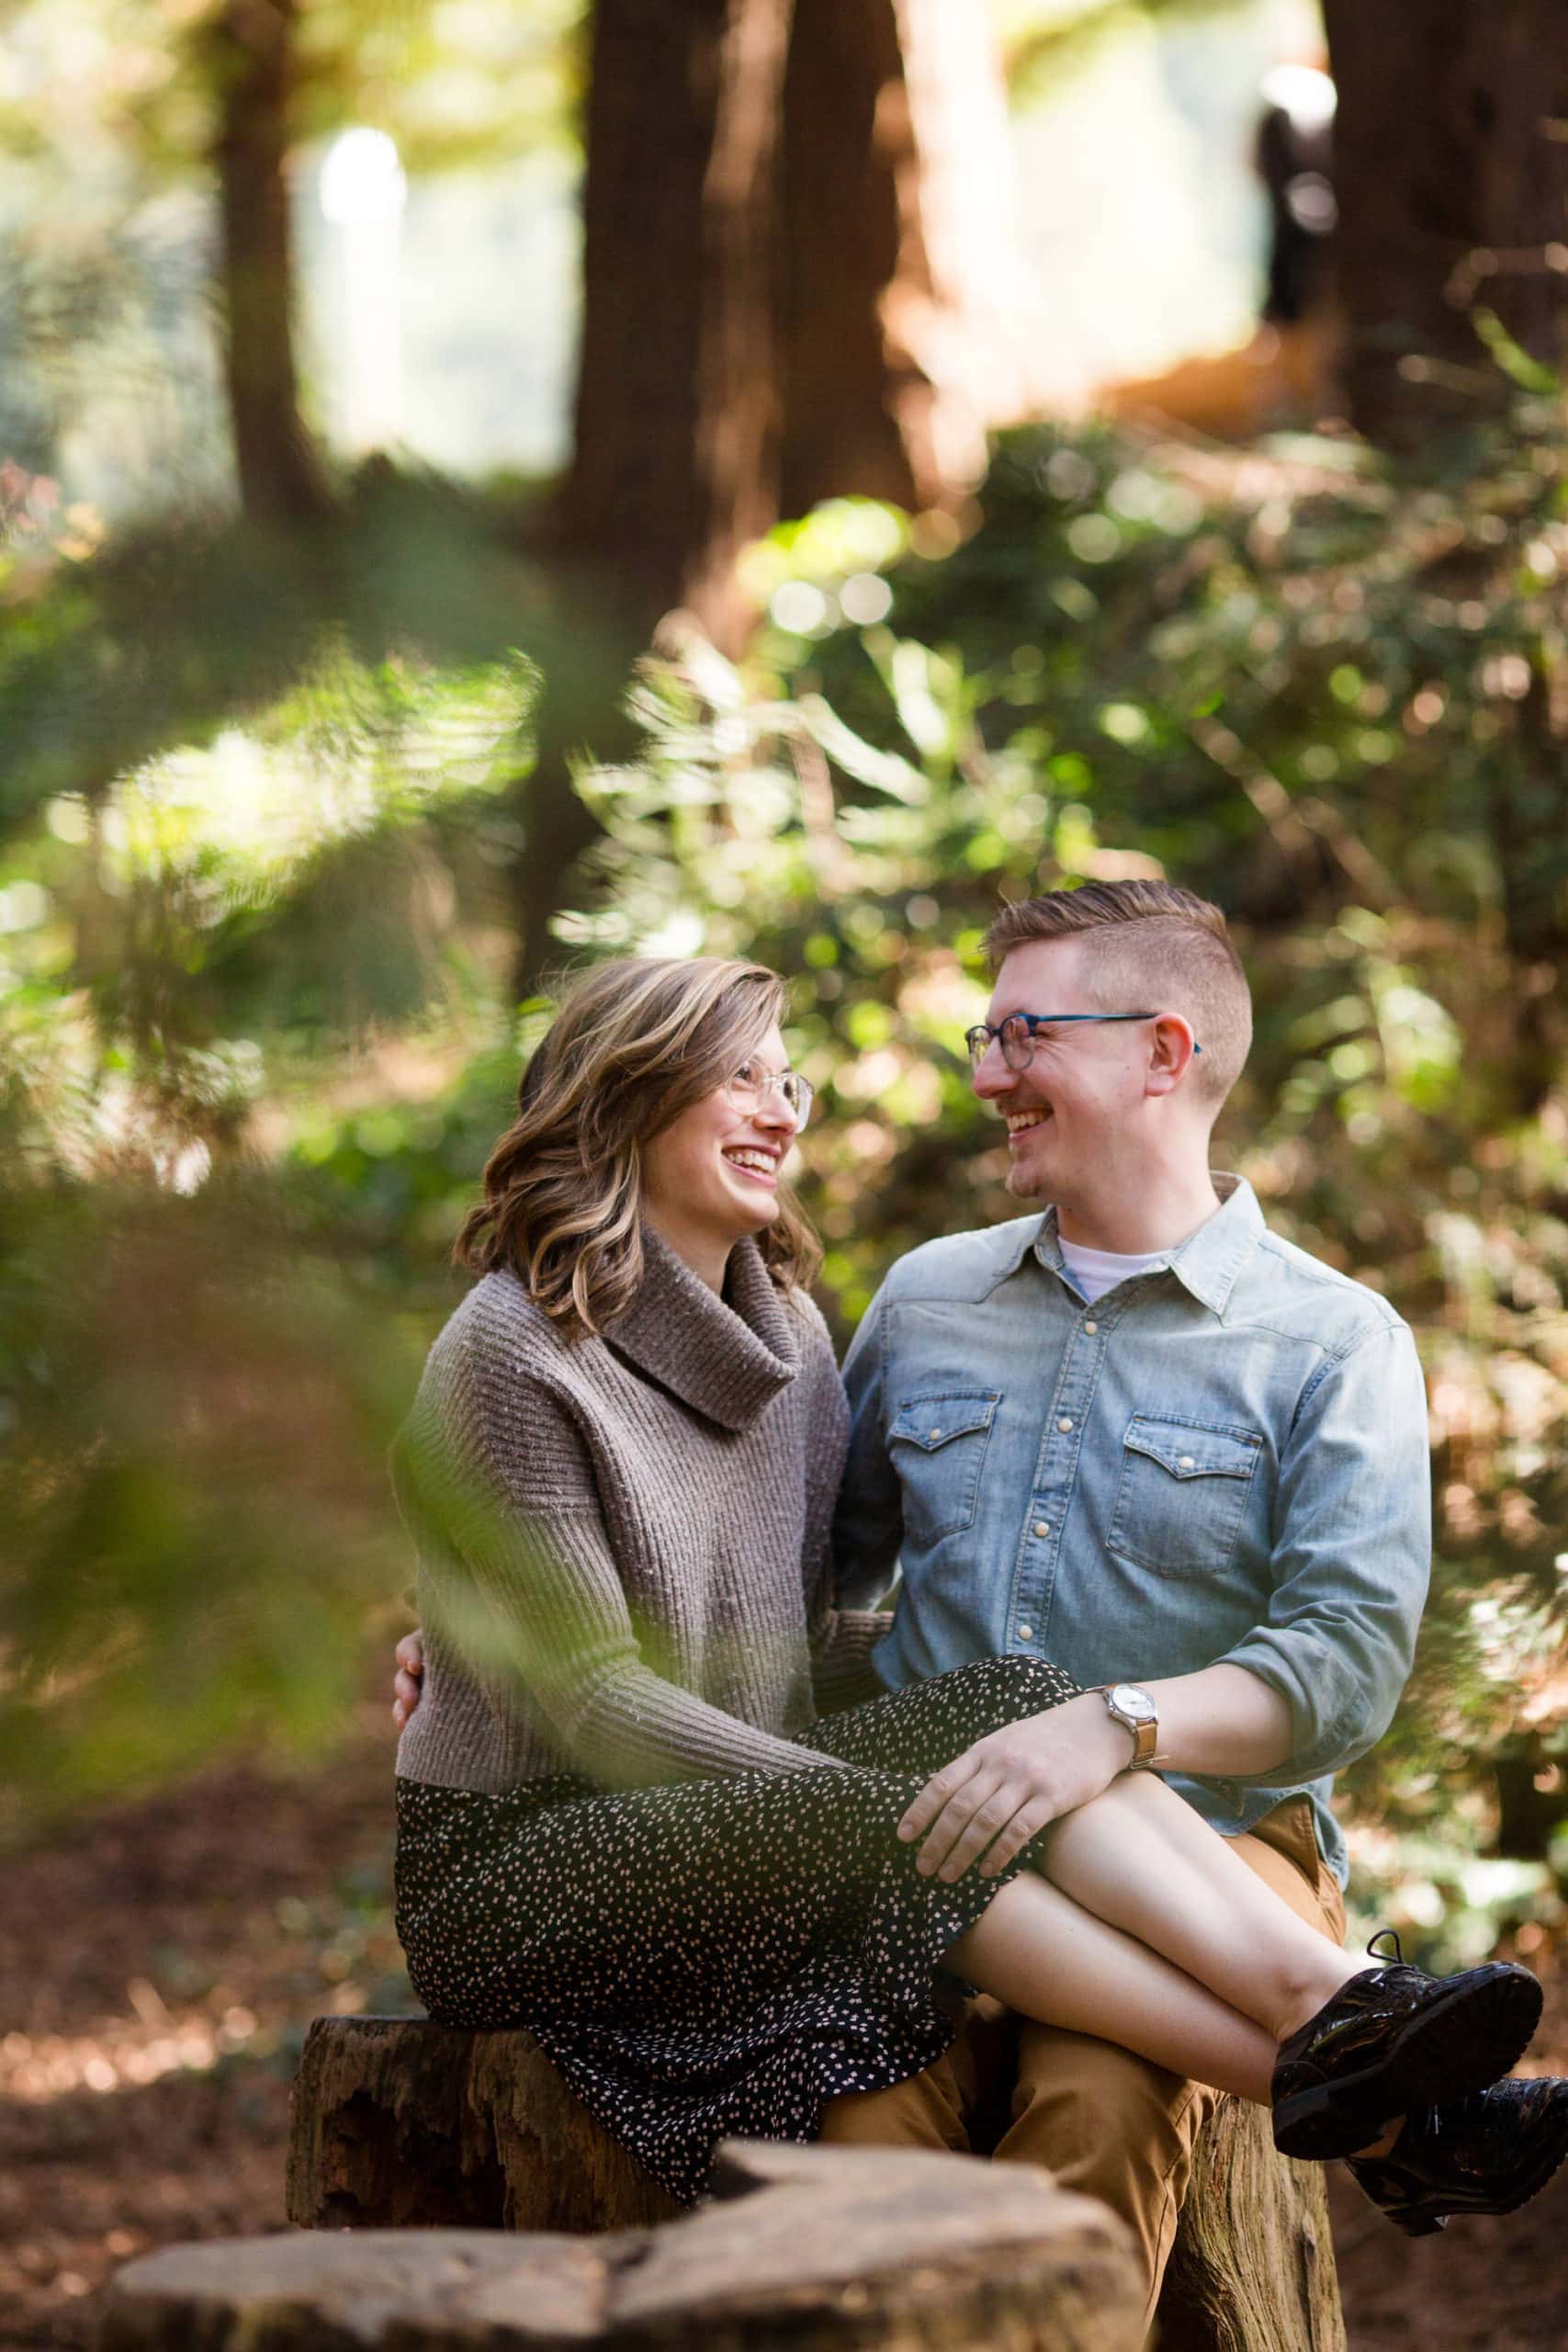 Couple sitting on a tree stump smiling and looking at each other in the woods